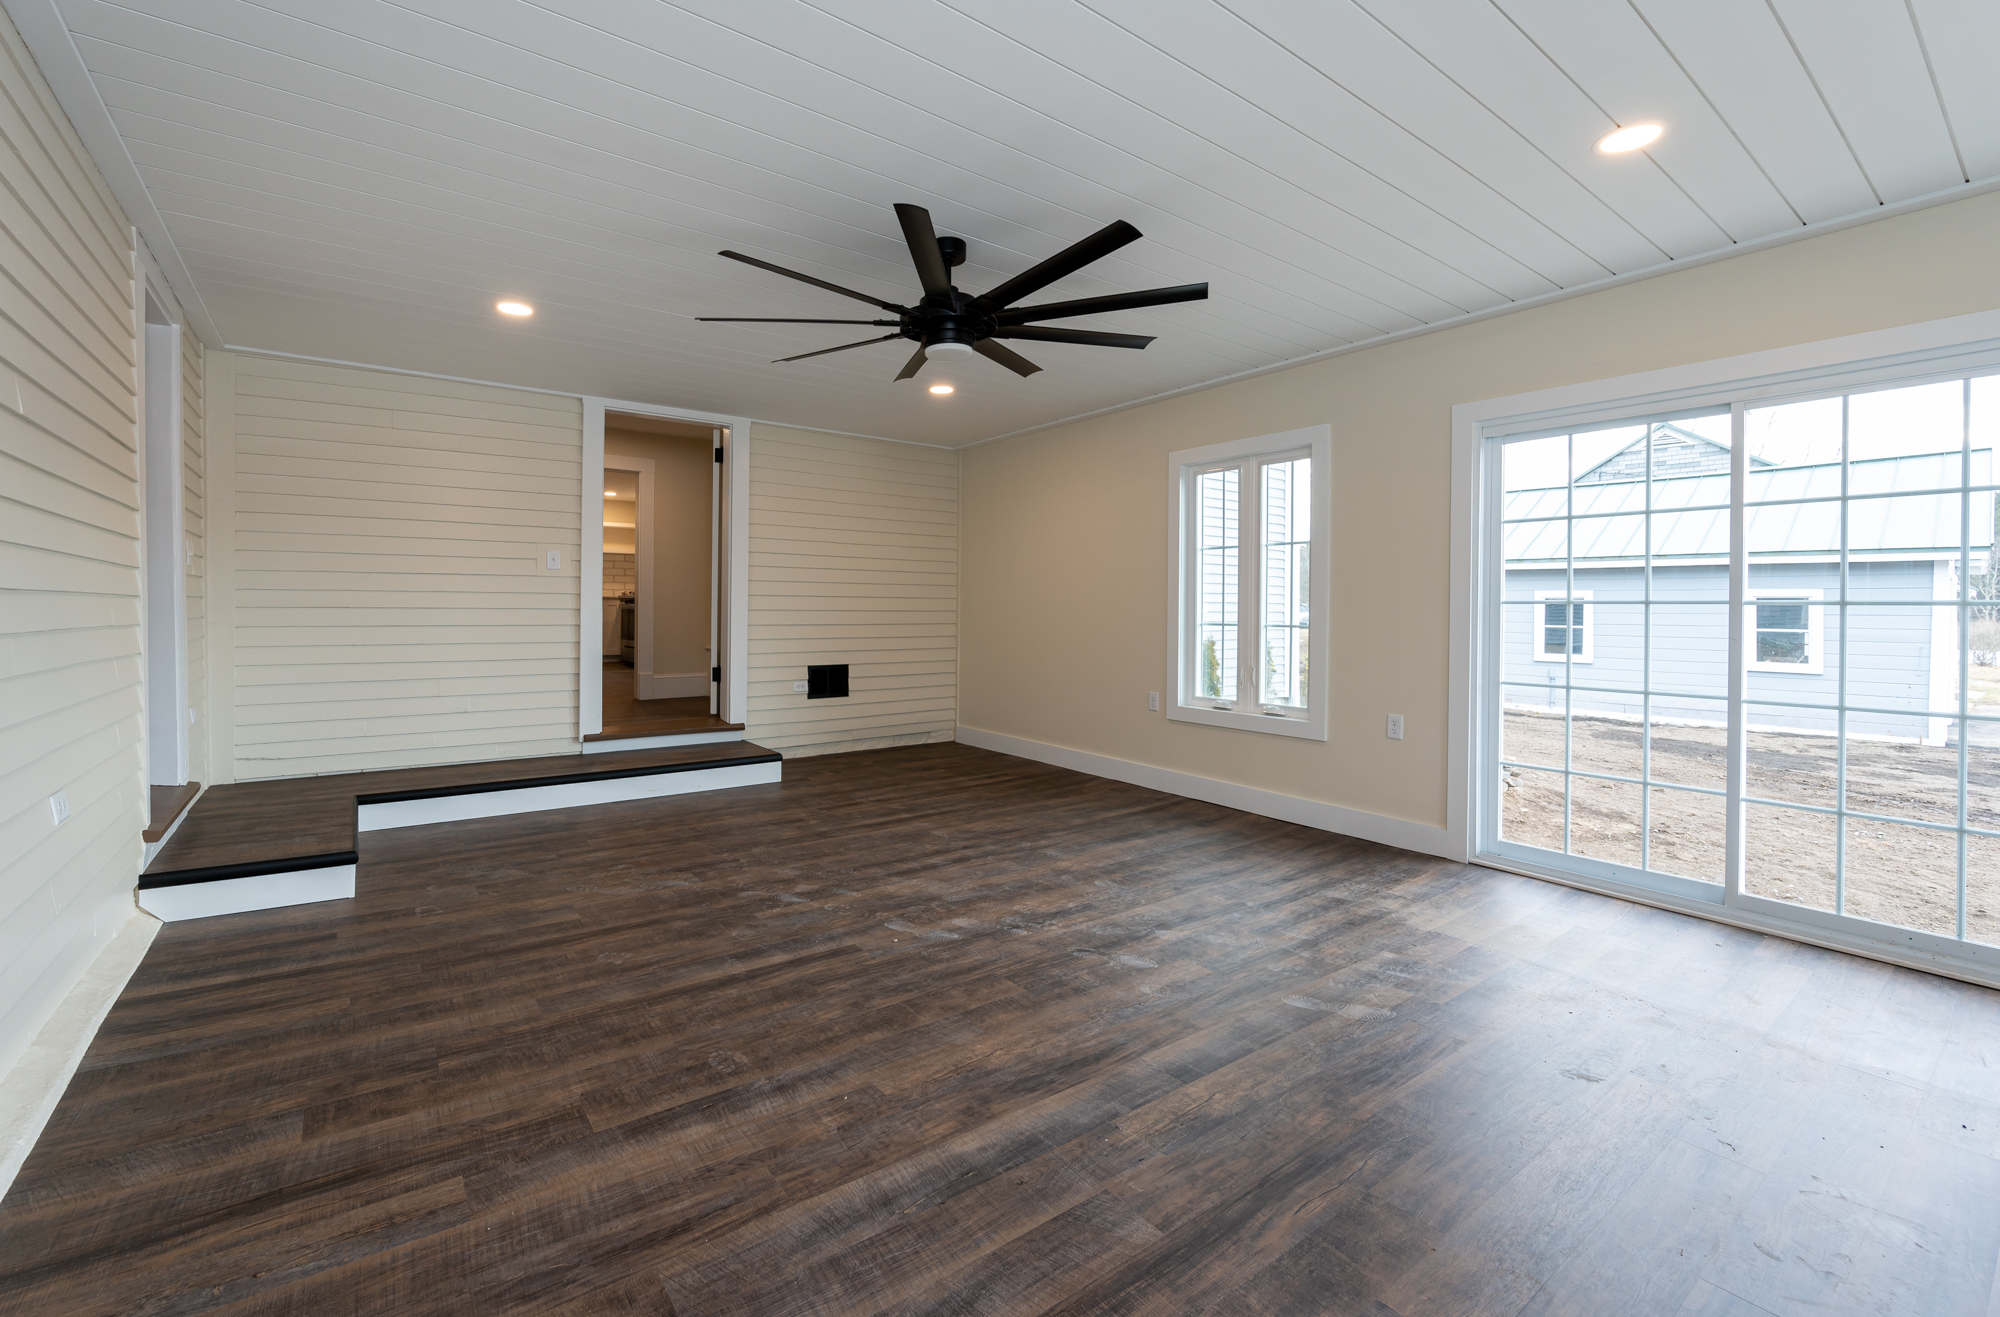 New addition, space with hardwood floors and ceiling fan